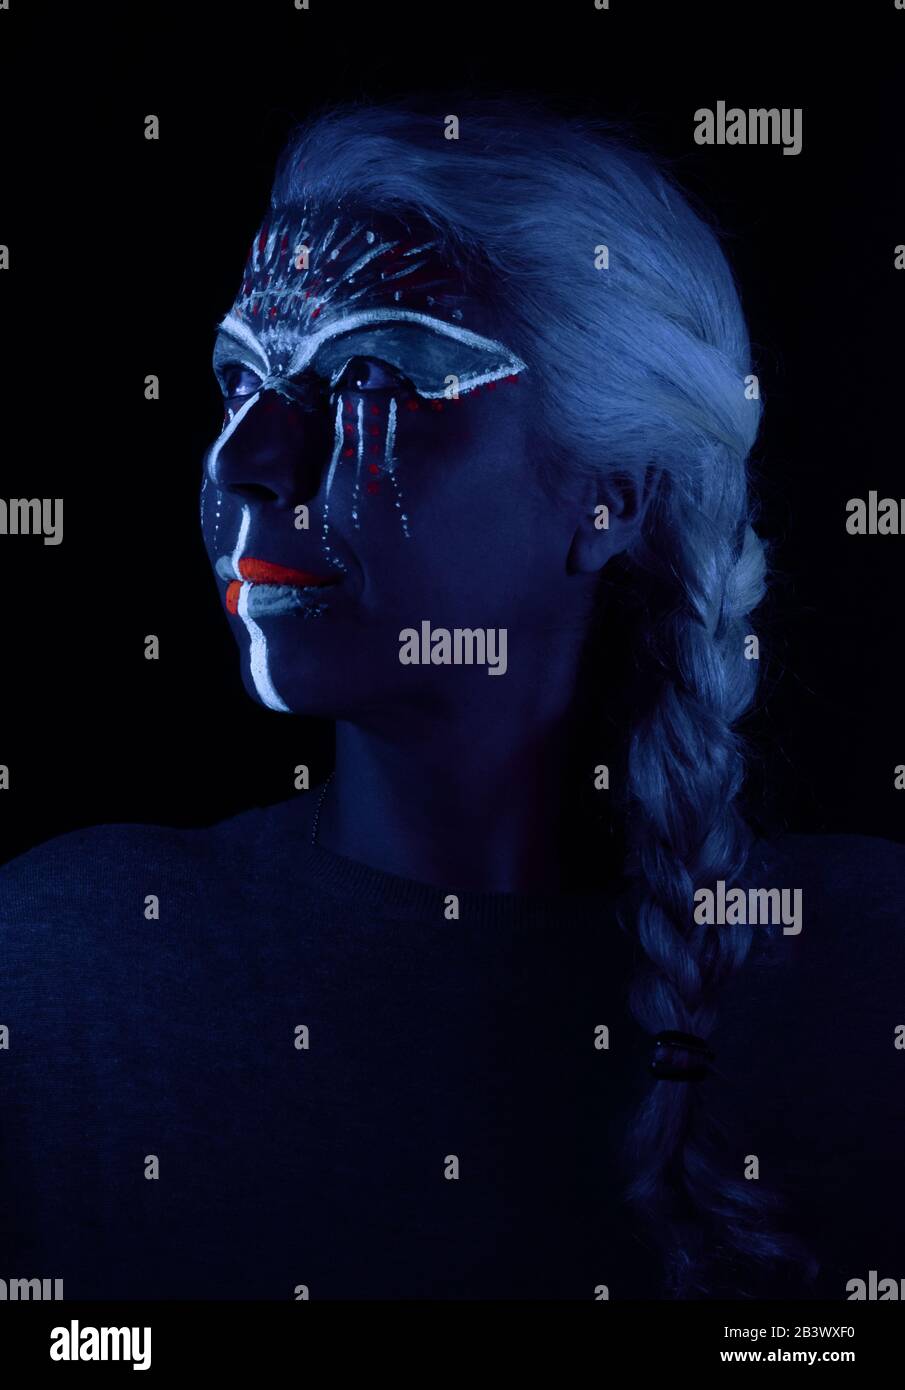 creative portrait of woman with white hair and ultraviolet face paint and black light Stock Photo